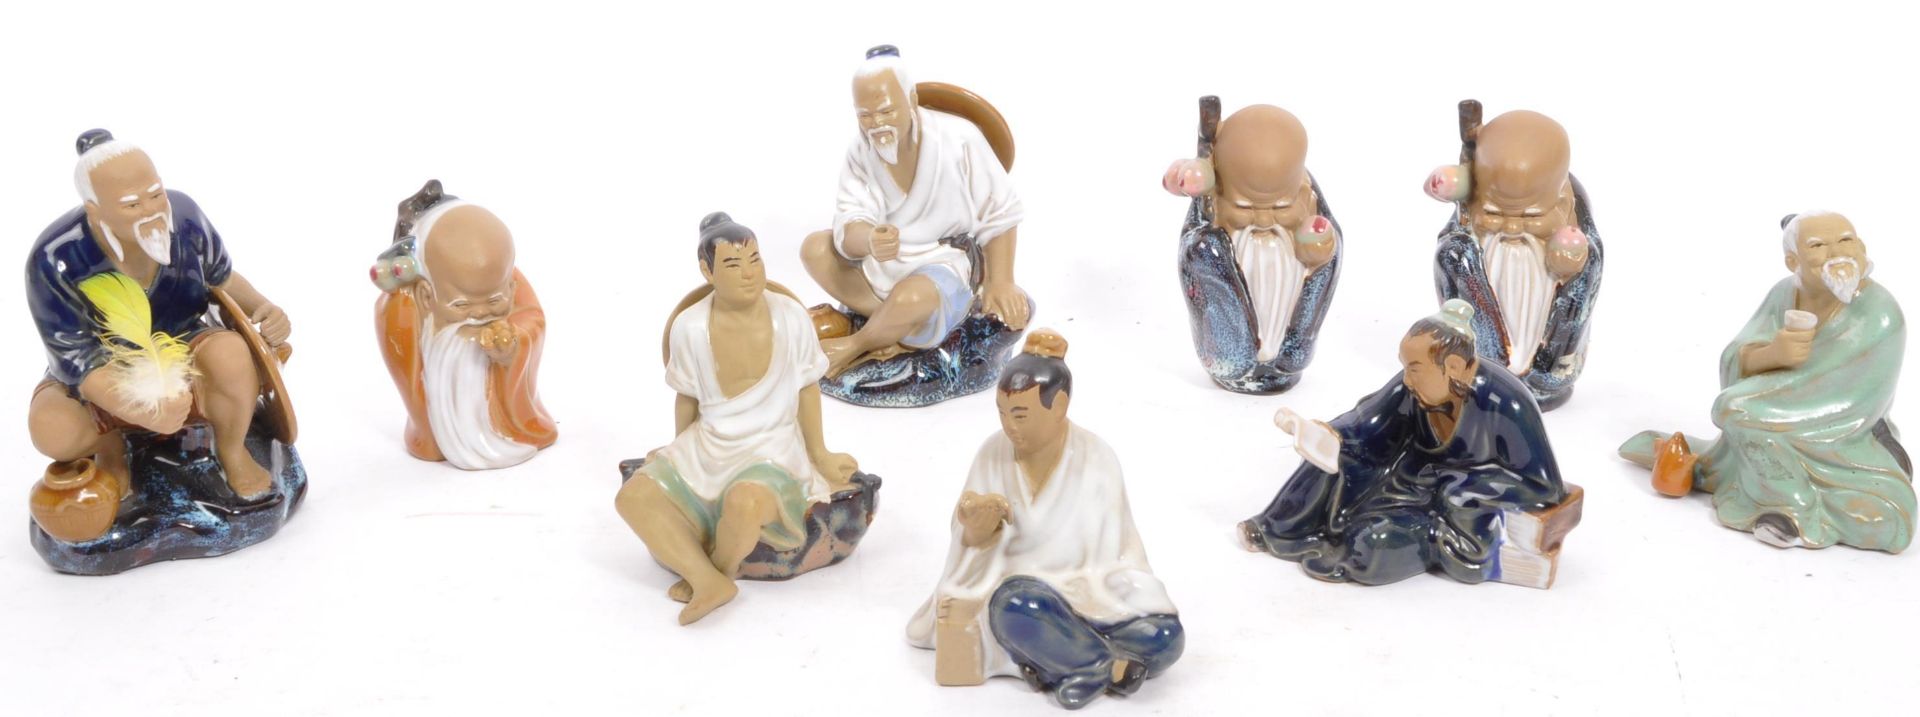 VINTAGE 20TH CENTURY SHIWAN CHINESE POTTERY FIGURES